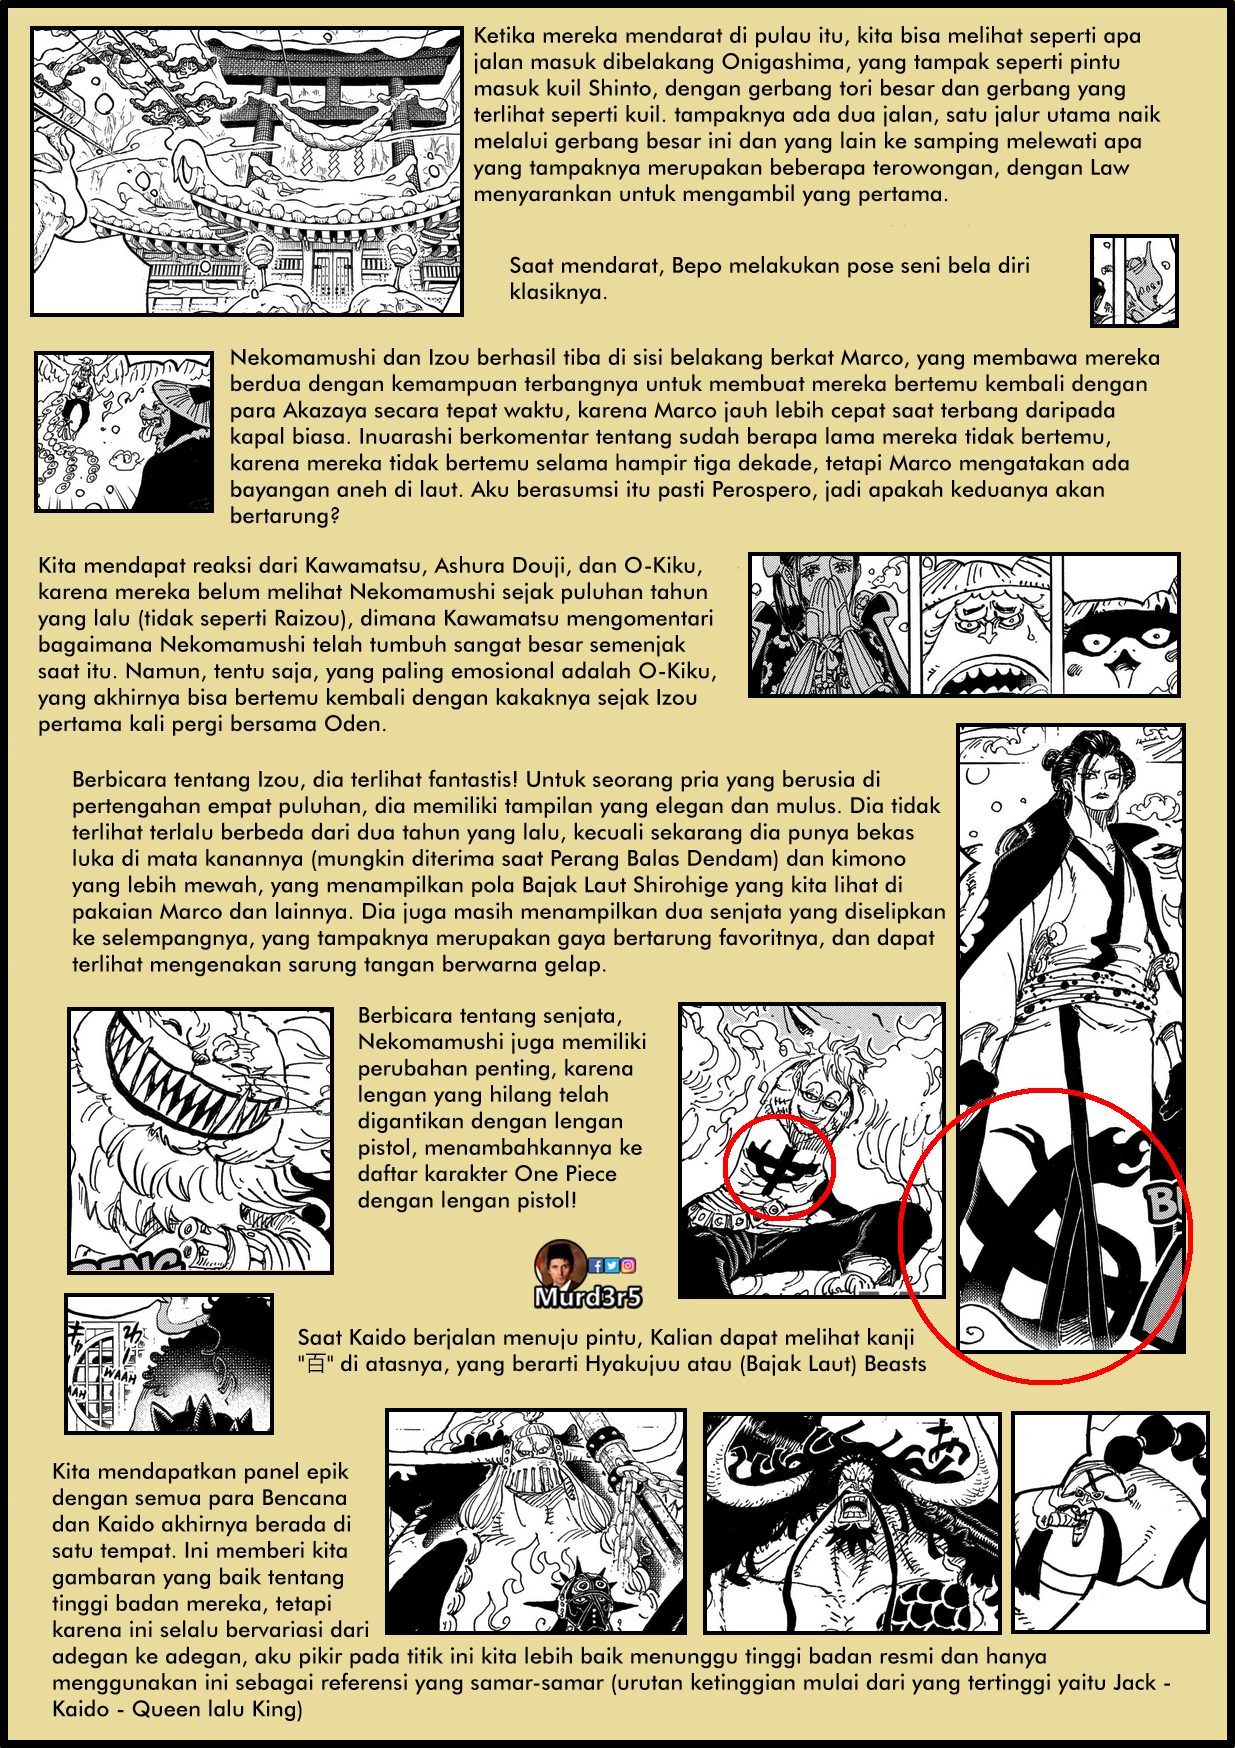 one-piece-chapter-984-analysis-3